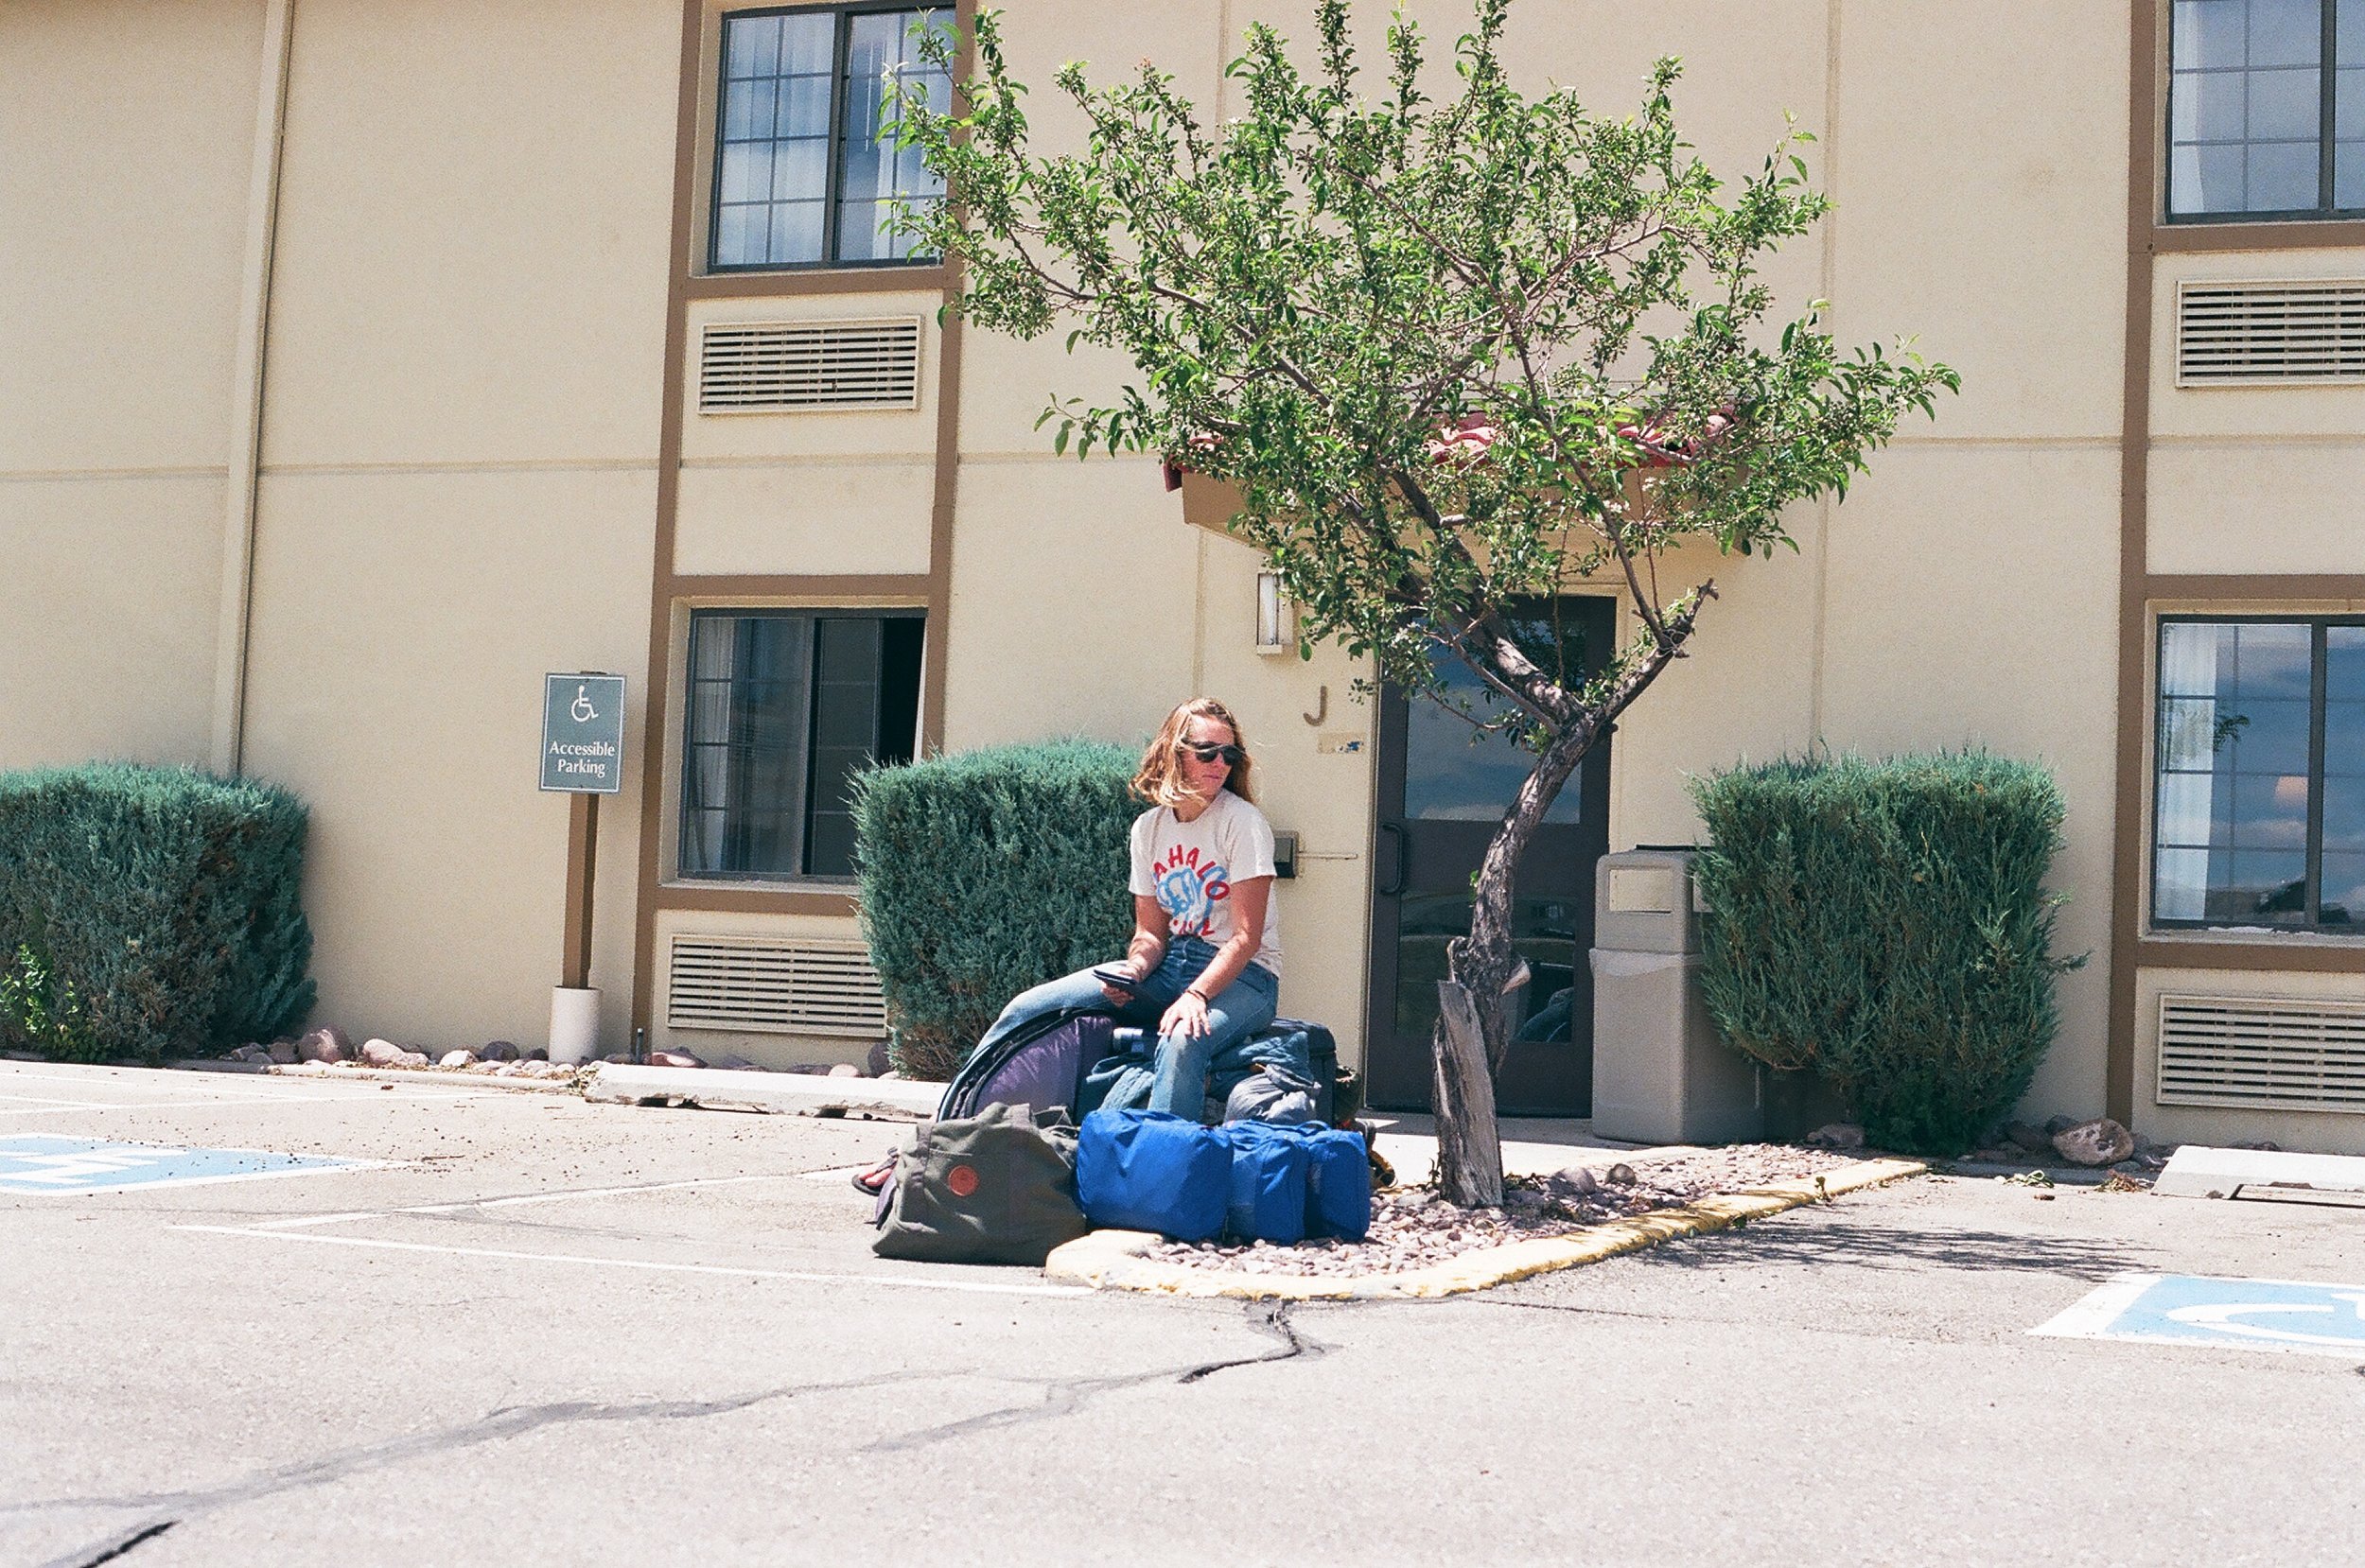  MAK hanging out with all of our belongings outside of our hotel room, 35mm 